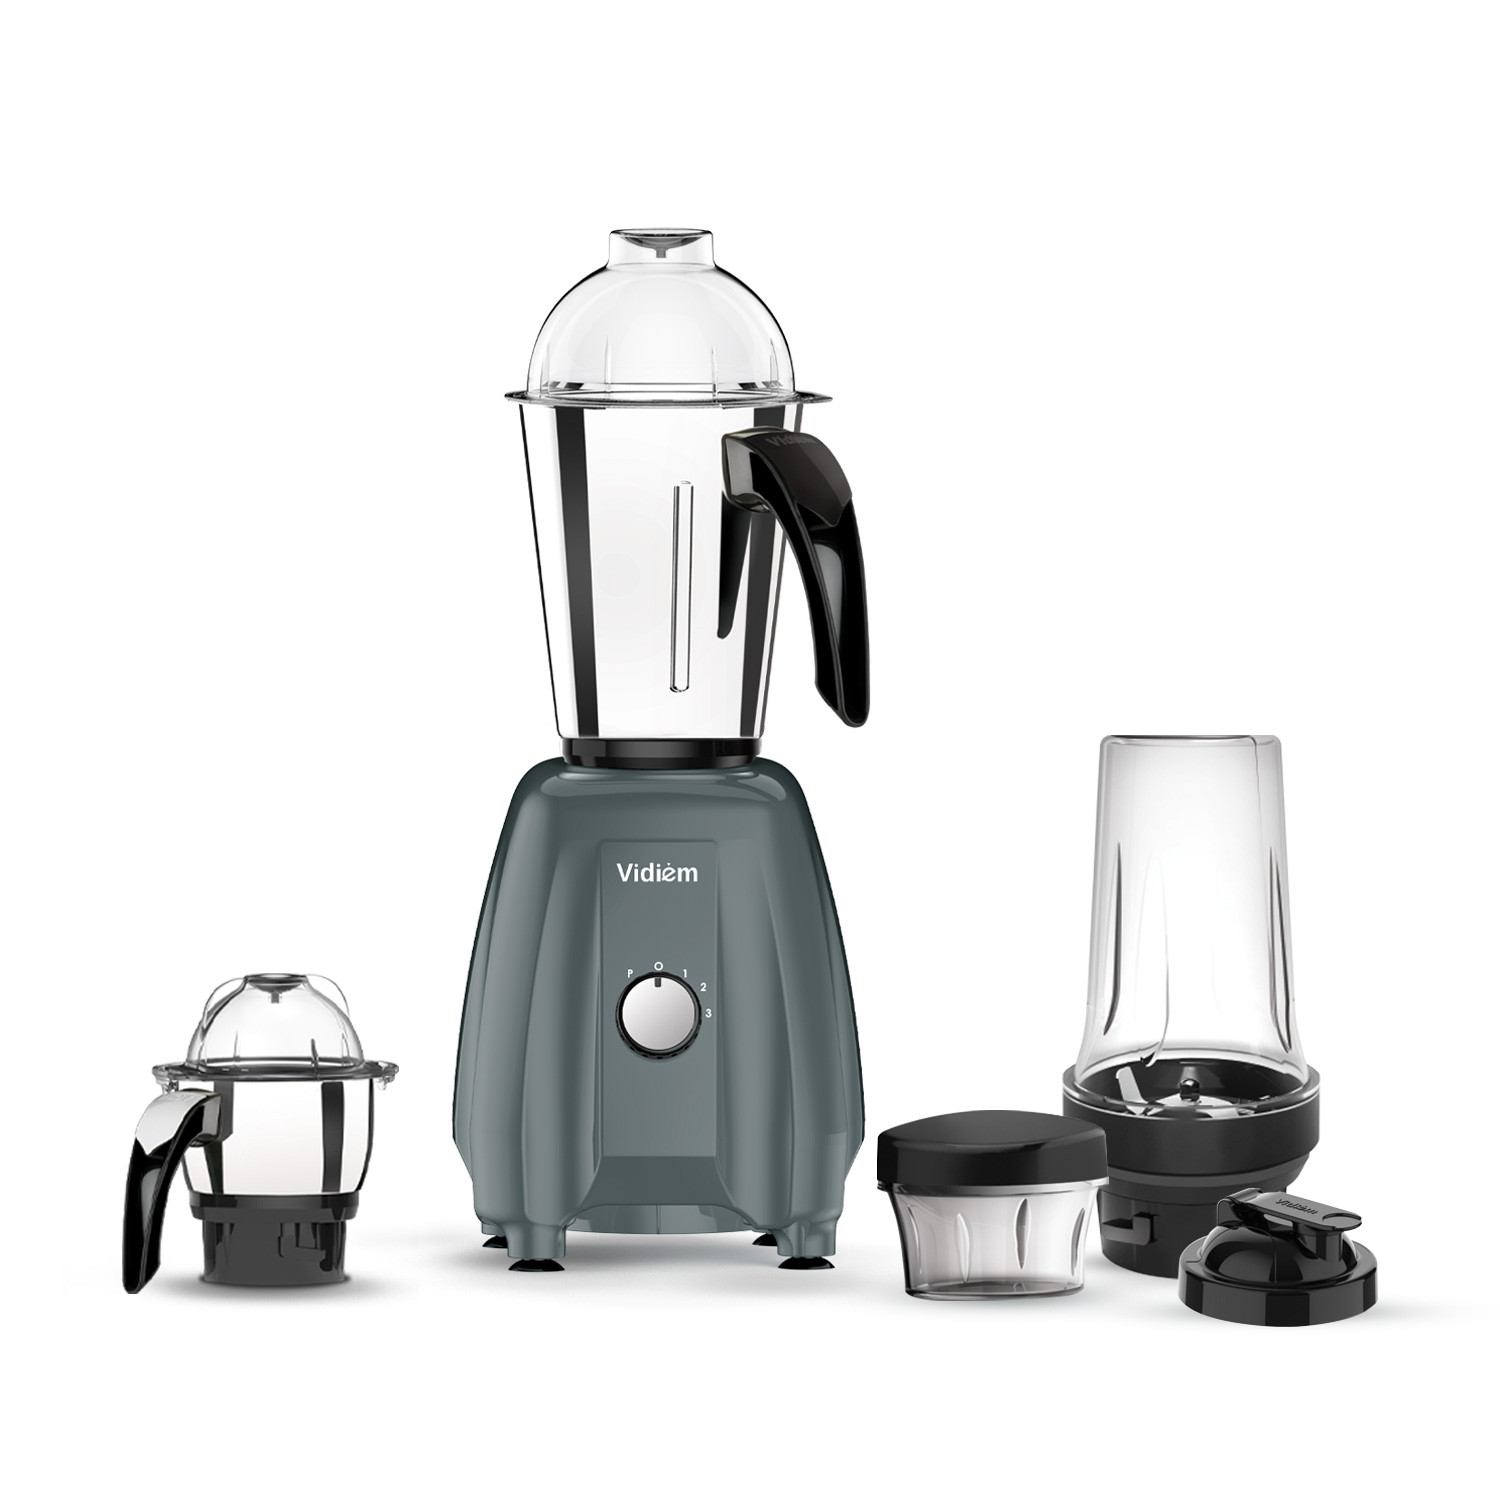 vidiem-eva-victor-pro-650w-110v-indian-mixer-grinder-ss-jars-250ml-spice-personal-coffee-herbs-grinder-with-500ml-personal-juices-shakes-smoothie-blender-made-for-canada-usa1